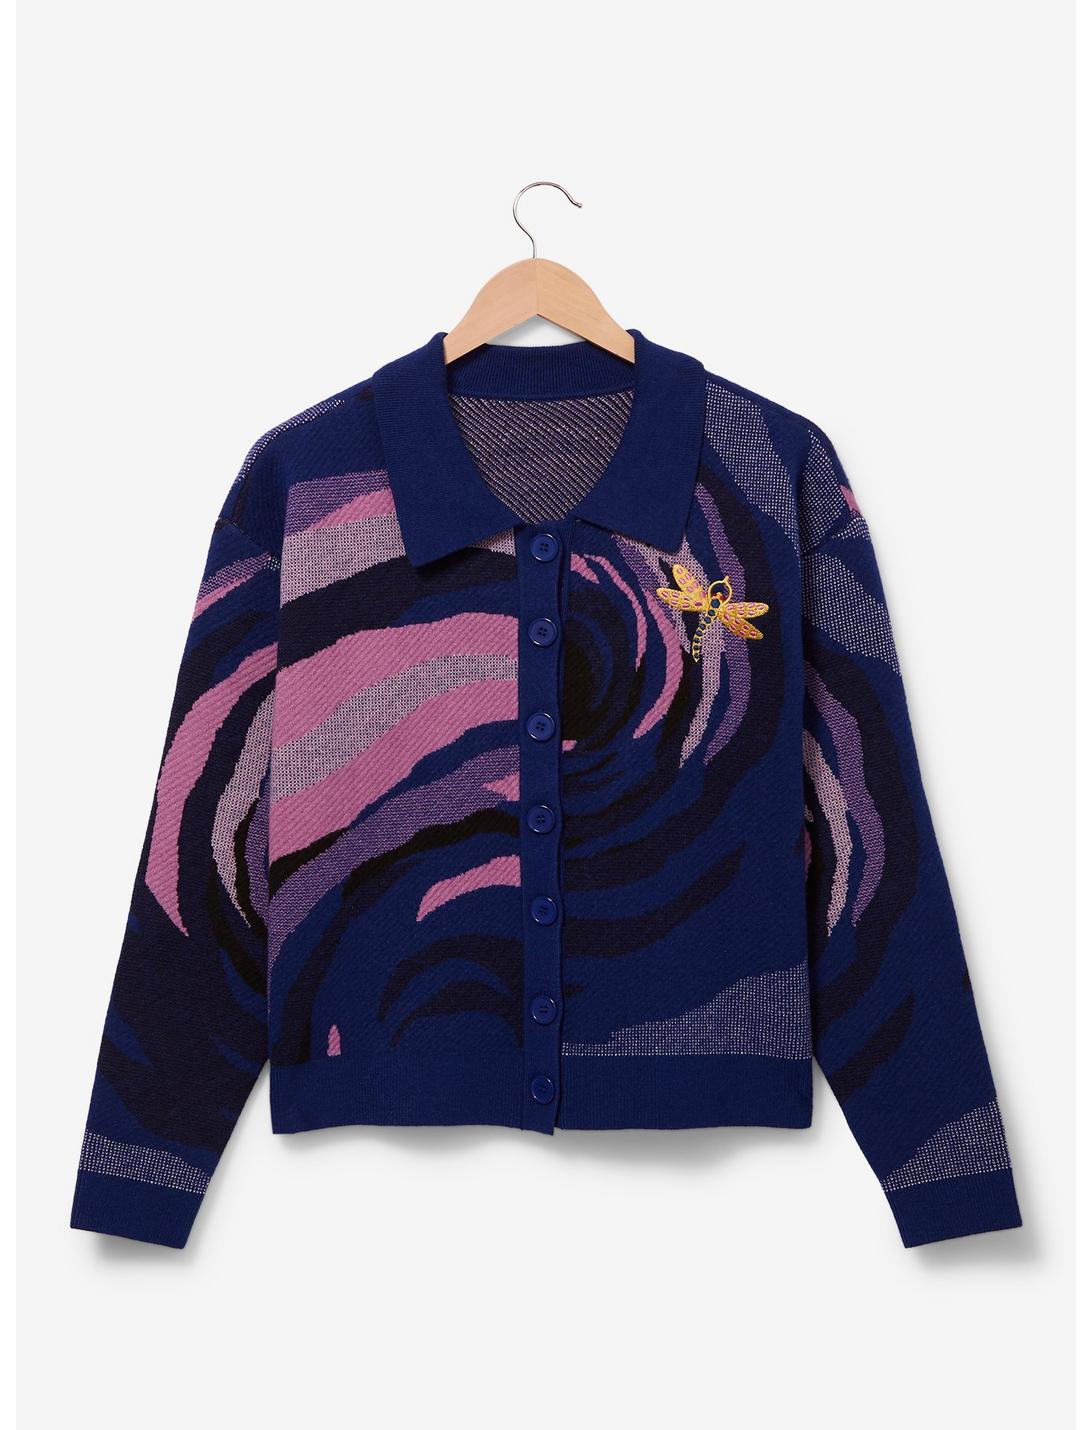 Coraline Dragonfly Collared Women's Plus Size Cardigan - BoxLunch Exclusive, MULTI, hi-res